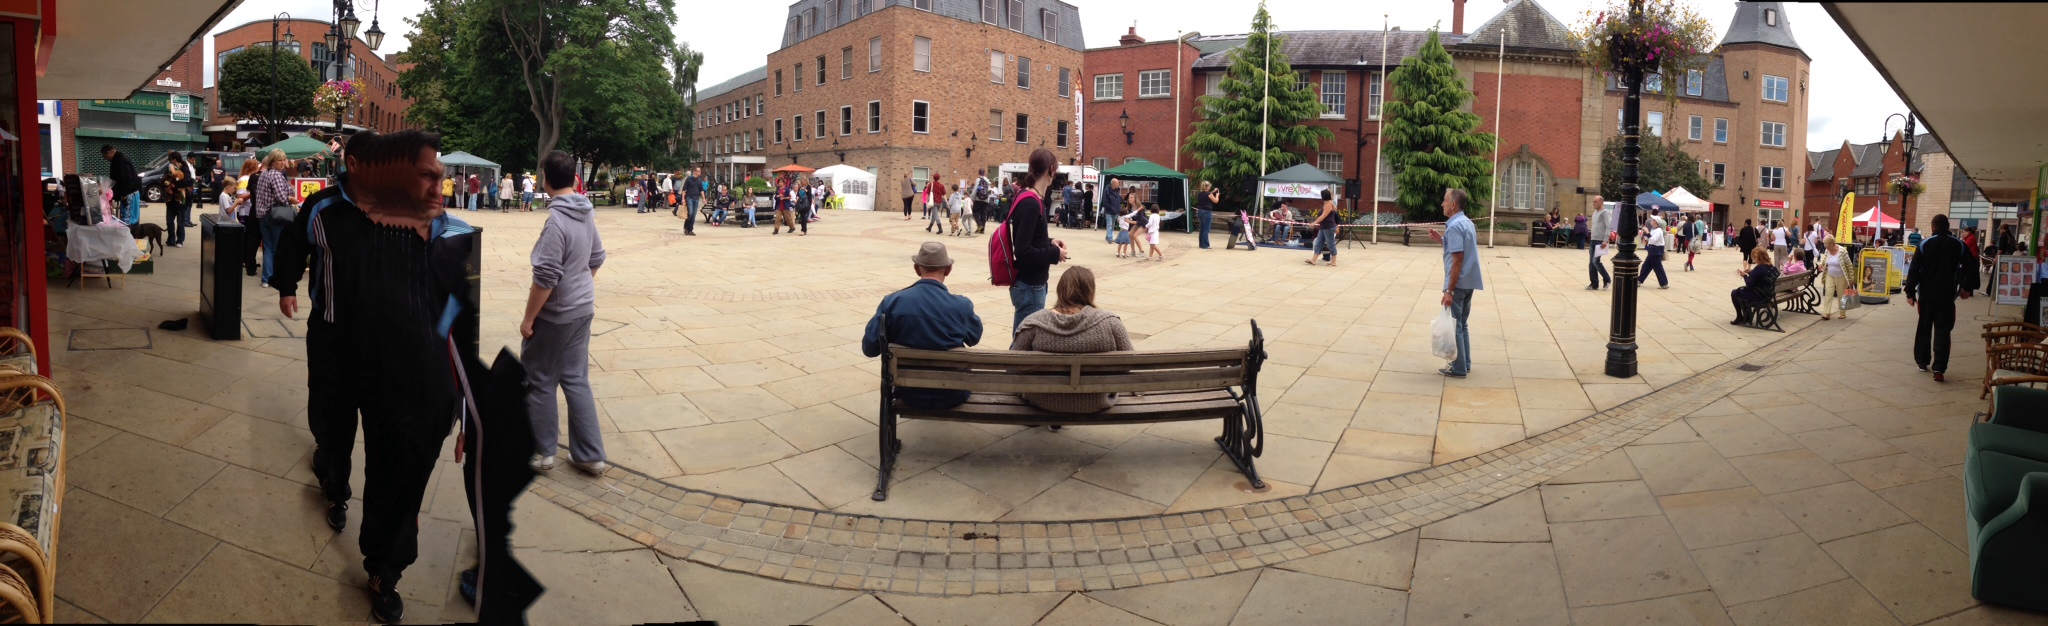 A panoramic view of Queens Square 